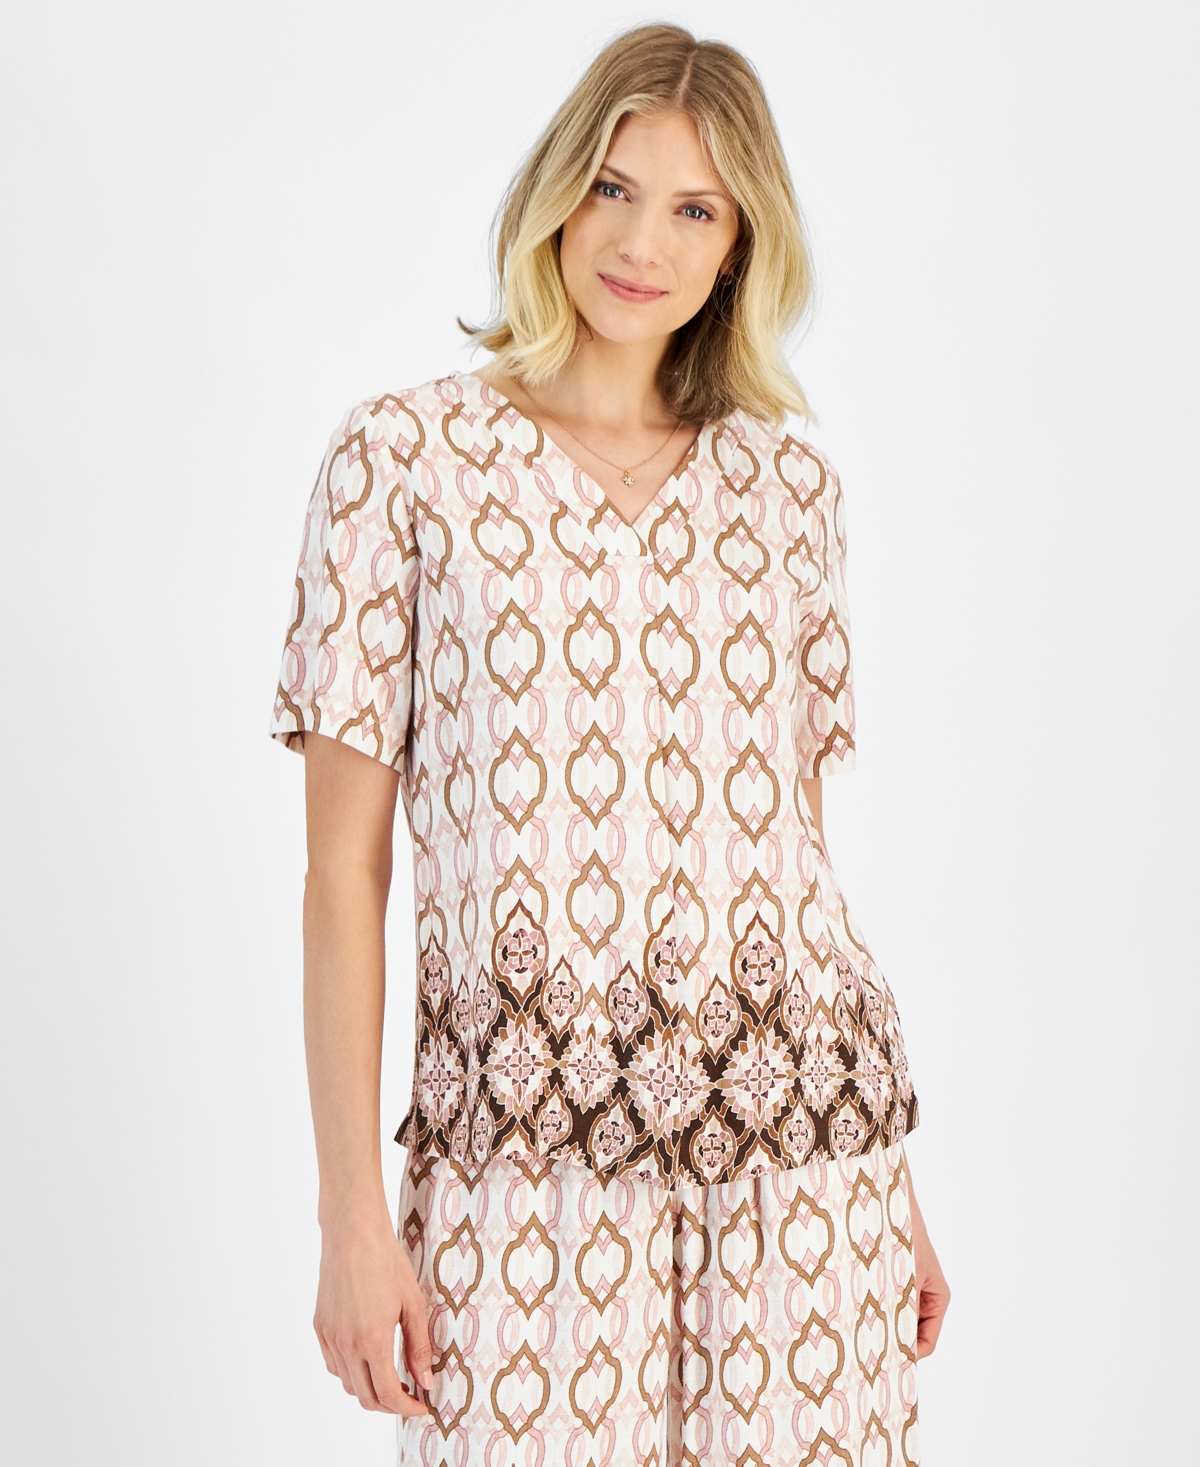 Petite Paradise Border V-Neck Short-Sleeve Top, Created for Macy's - Neo Natural Combo